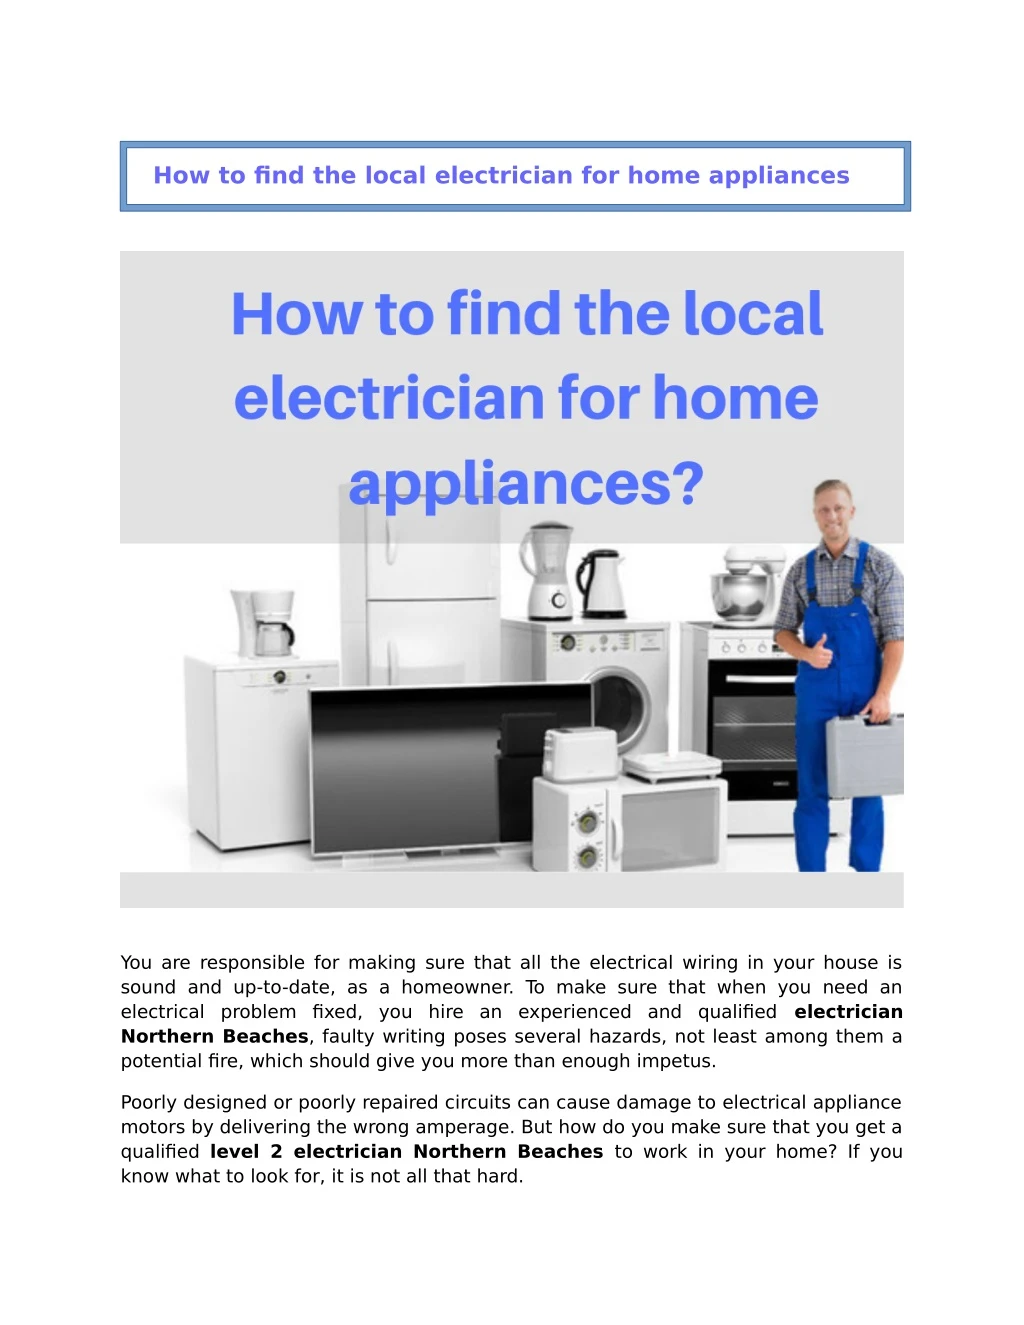 how to find the local electrician for home